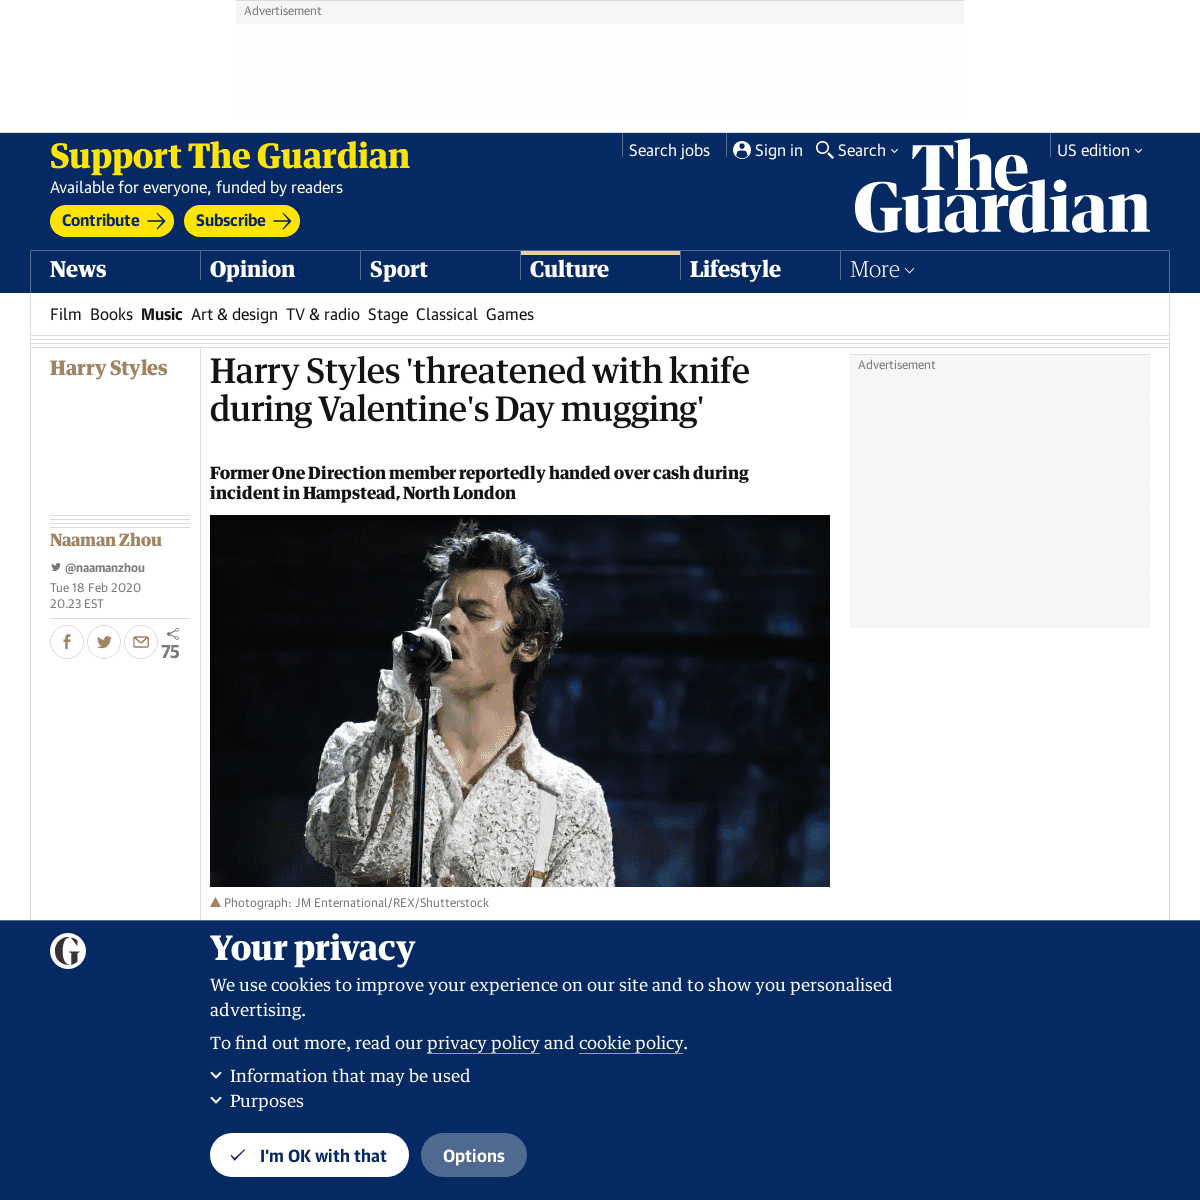 A complete backup of www.theguardian.com/music/2020/feb/19/harry-styles-threatened-with-knife-during-valentines-day-mugging